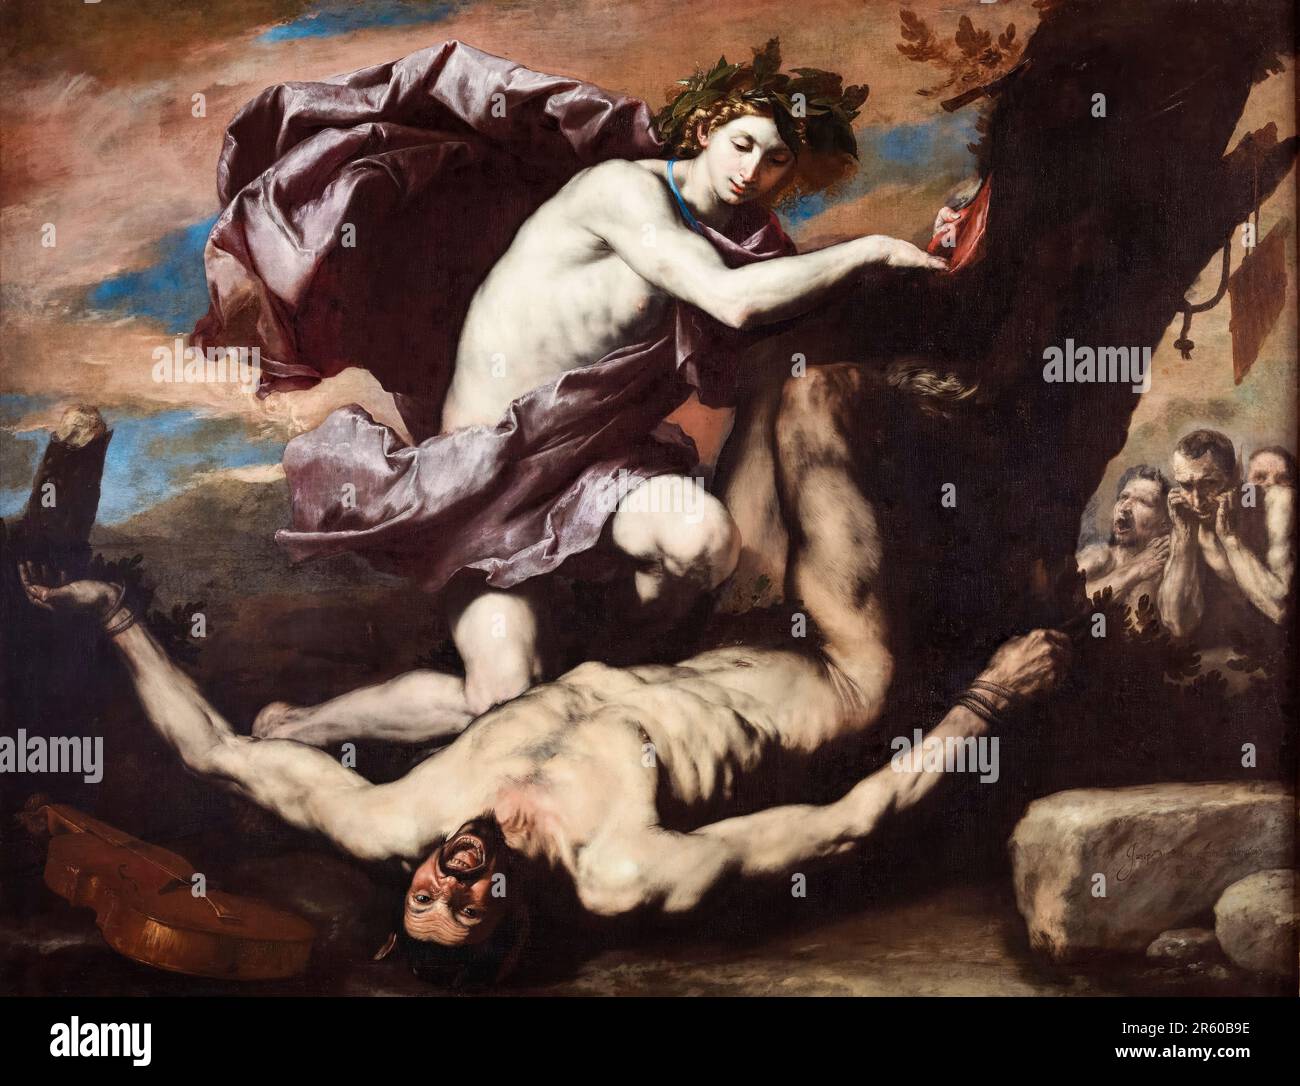 Jusepe de Ribera, Apollo and Marsyas, painting in oil on canvas, 1637 Stock Photo